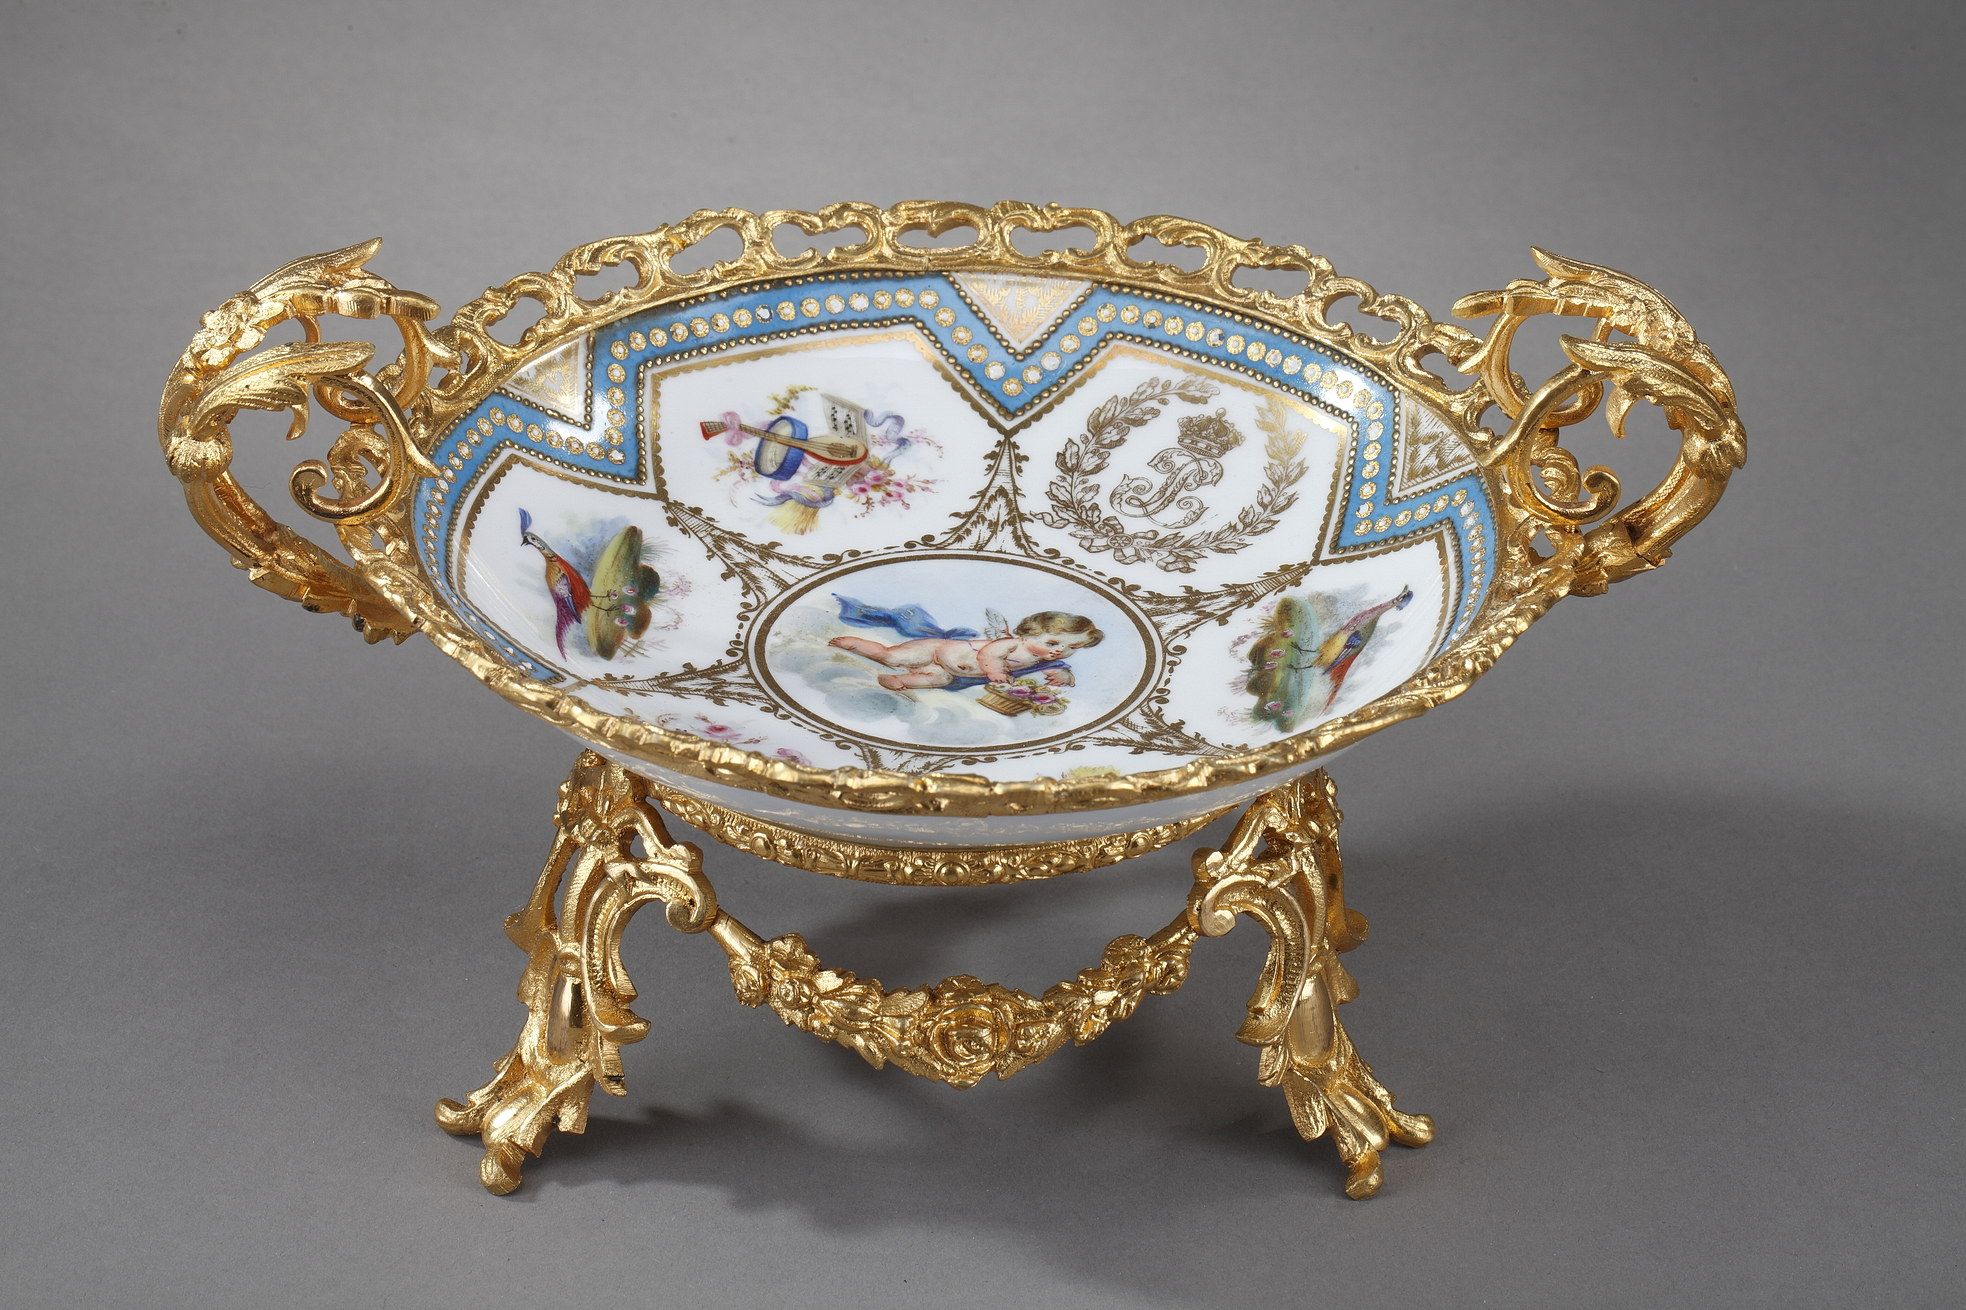 LOUIS-PHILIPPE SEVRES PORCELAIN CUP WITH DECORATION OF A CUPID 